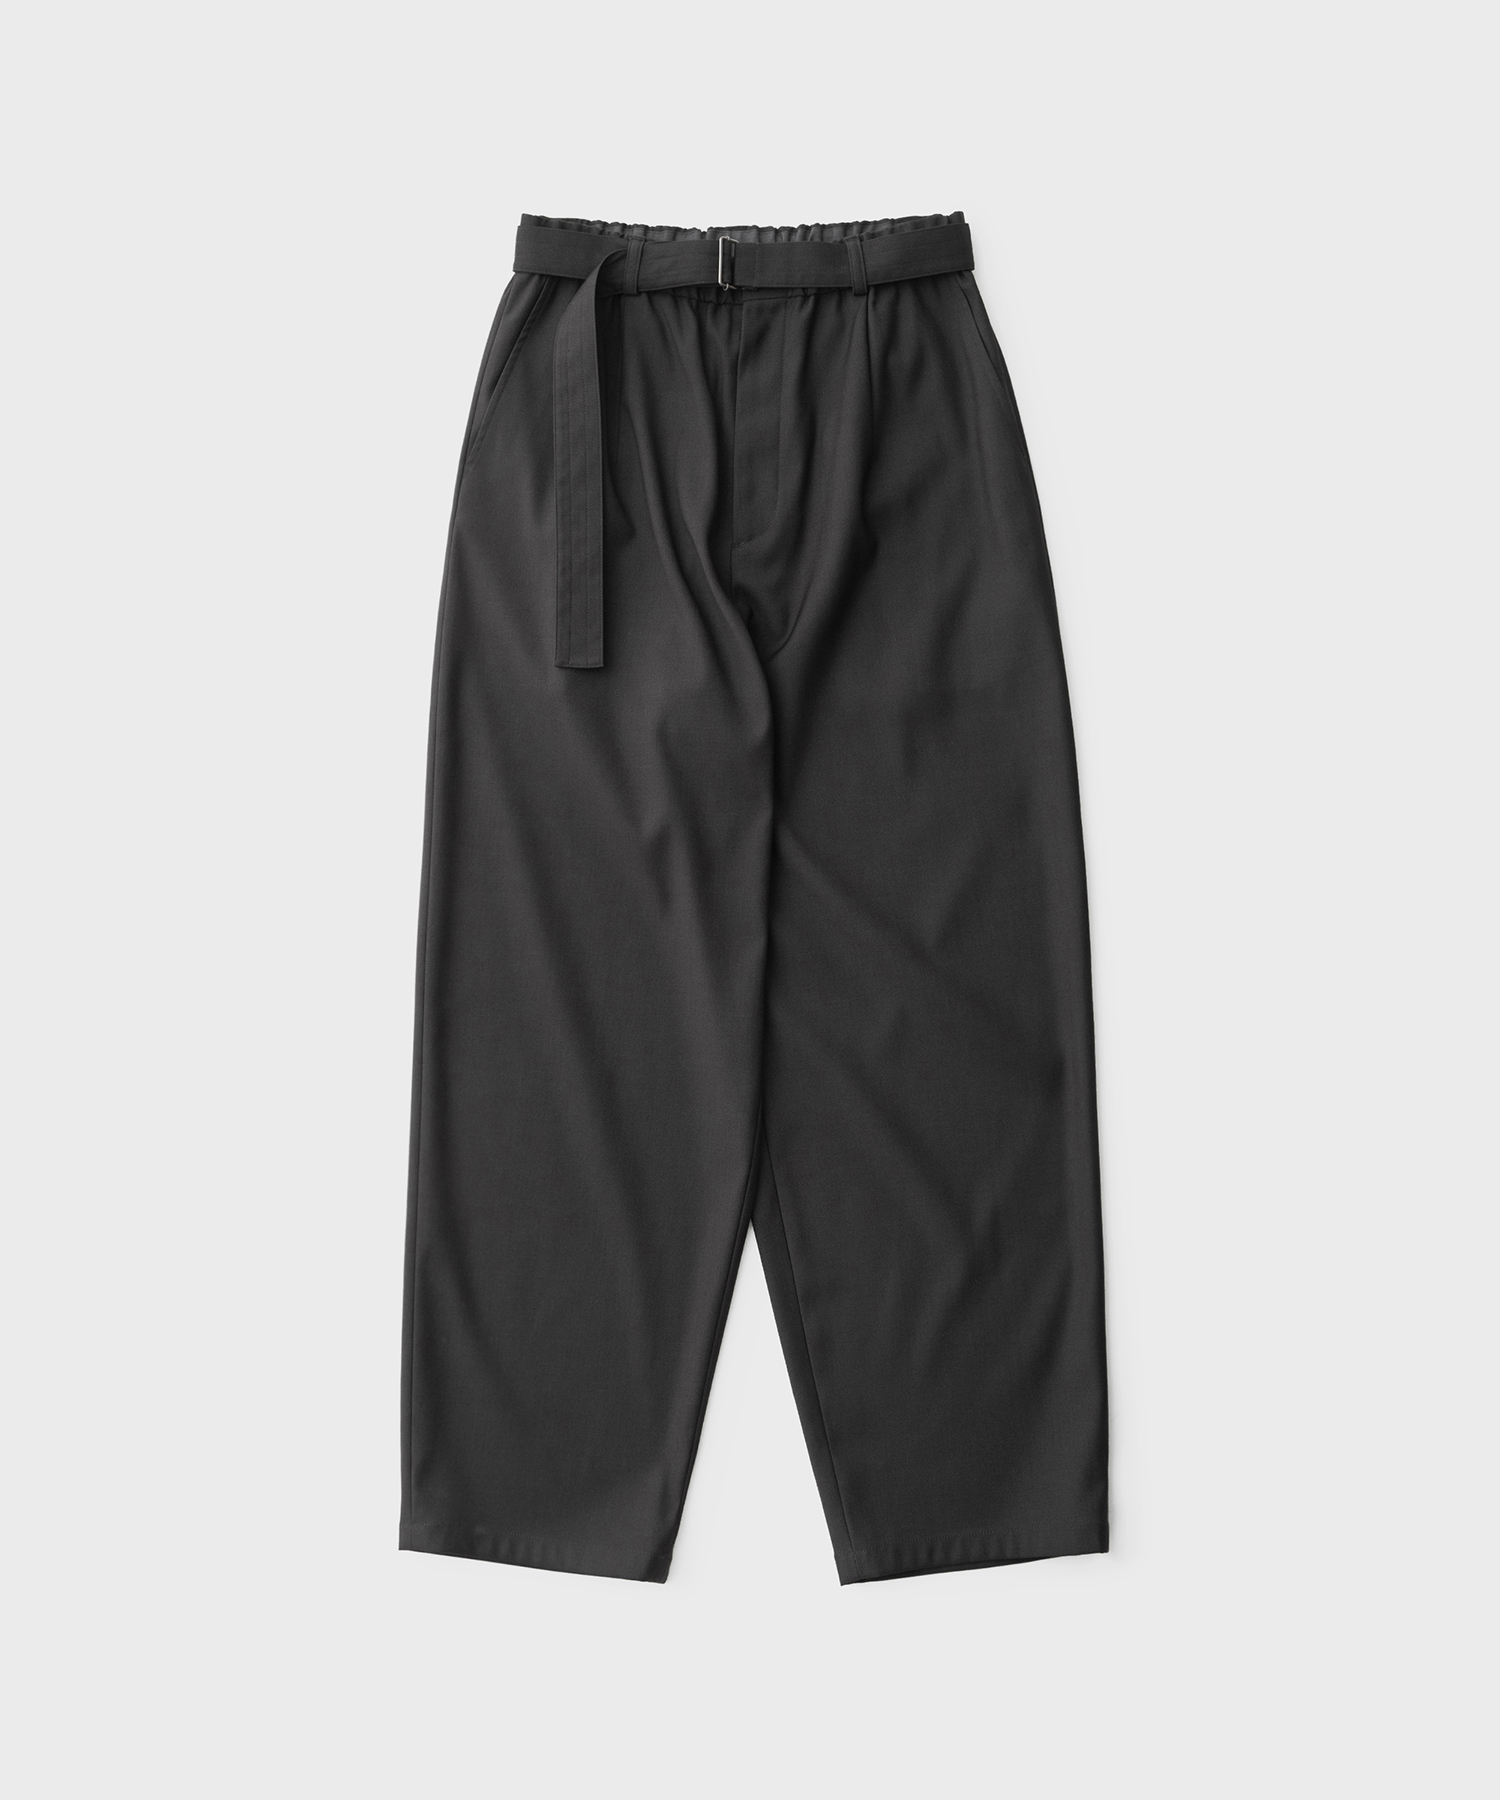 Cocoon Banded Pants (Charcoal)